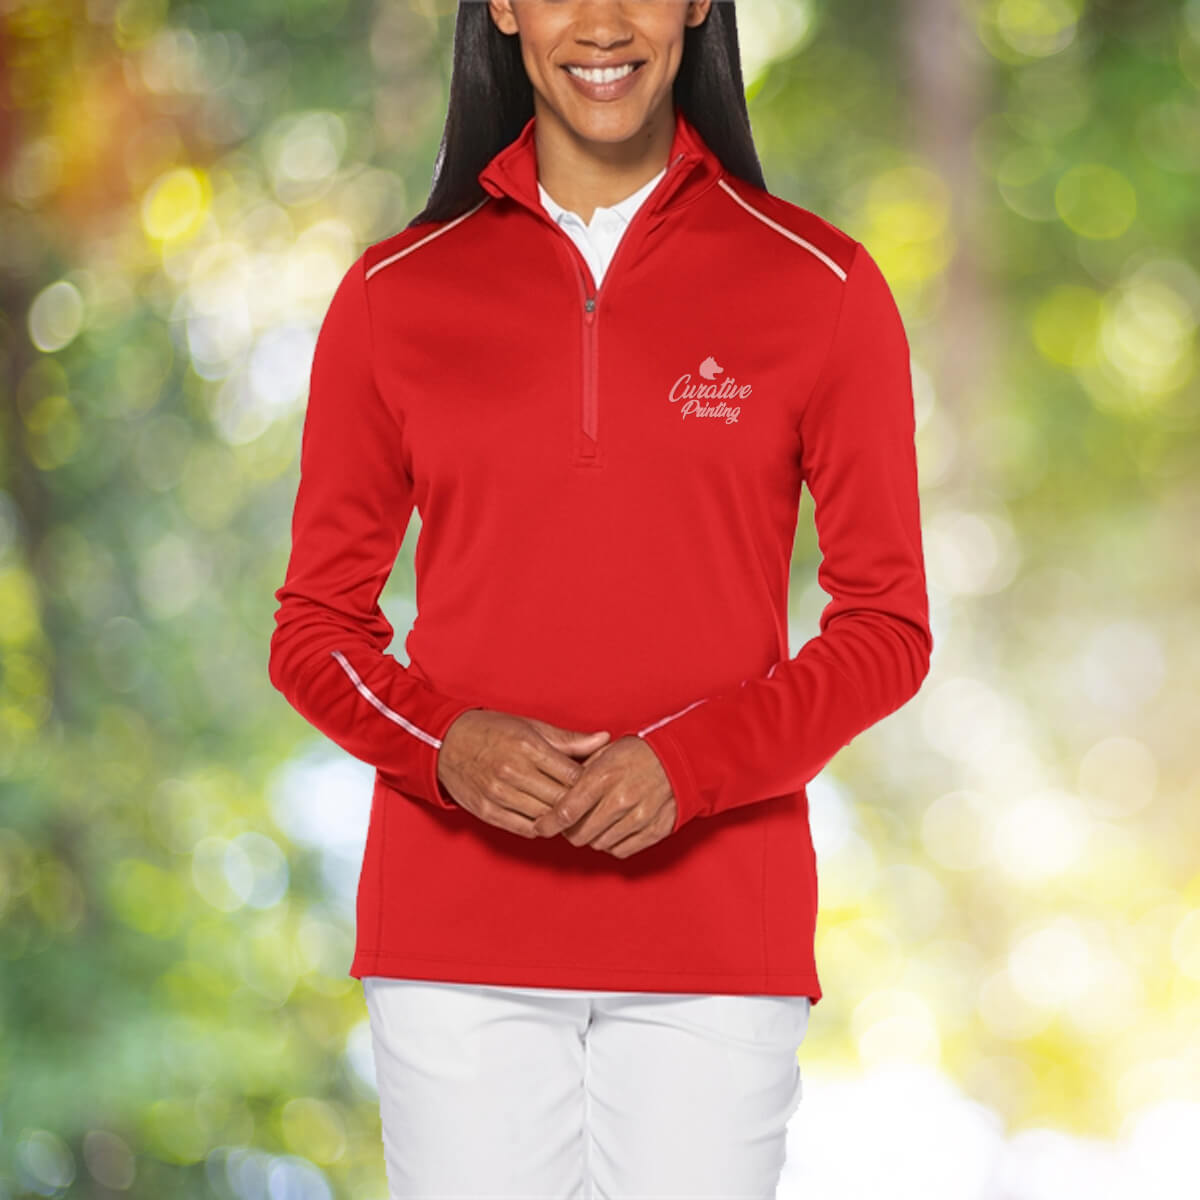 Woman in the outdoors wearing red quarter zip sweatshirt apparel with white curative printing logo imprint